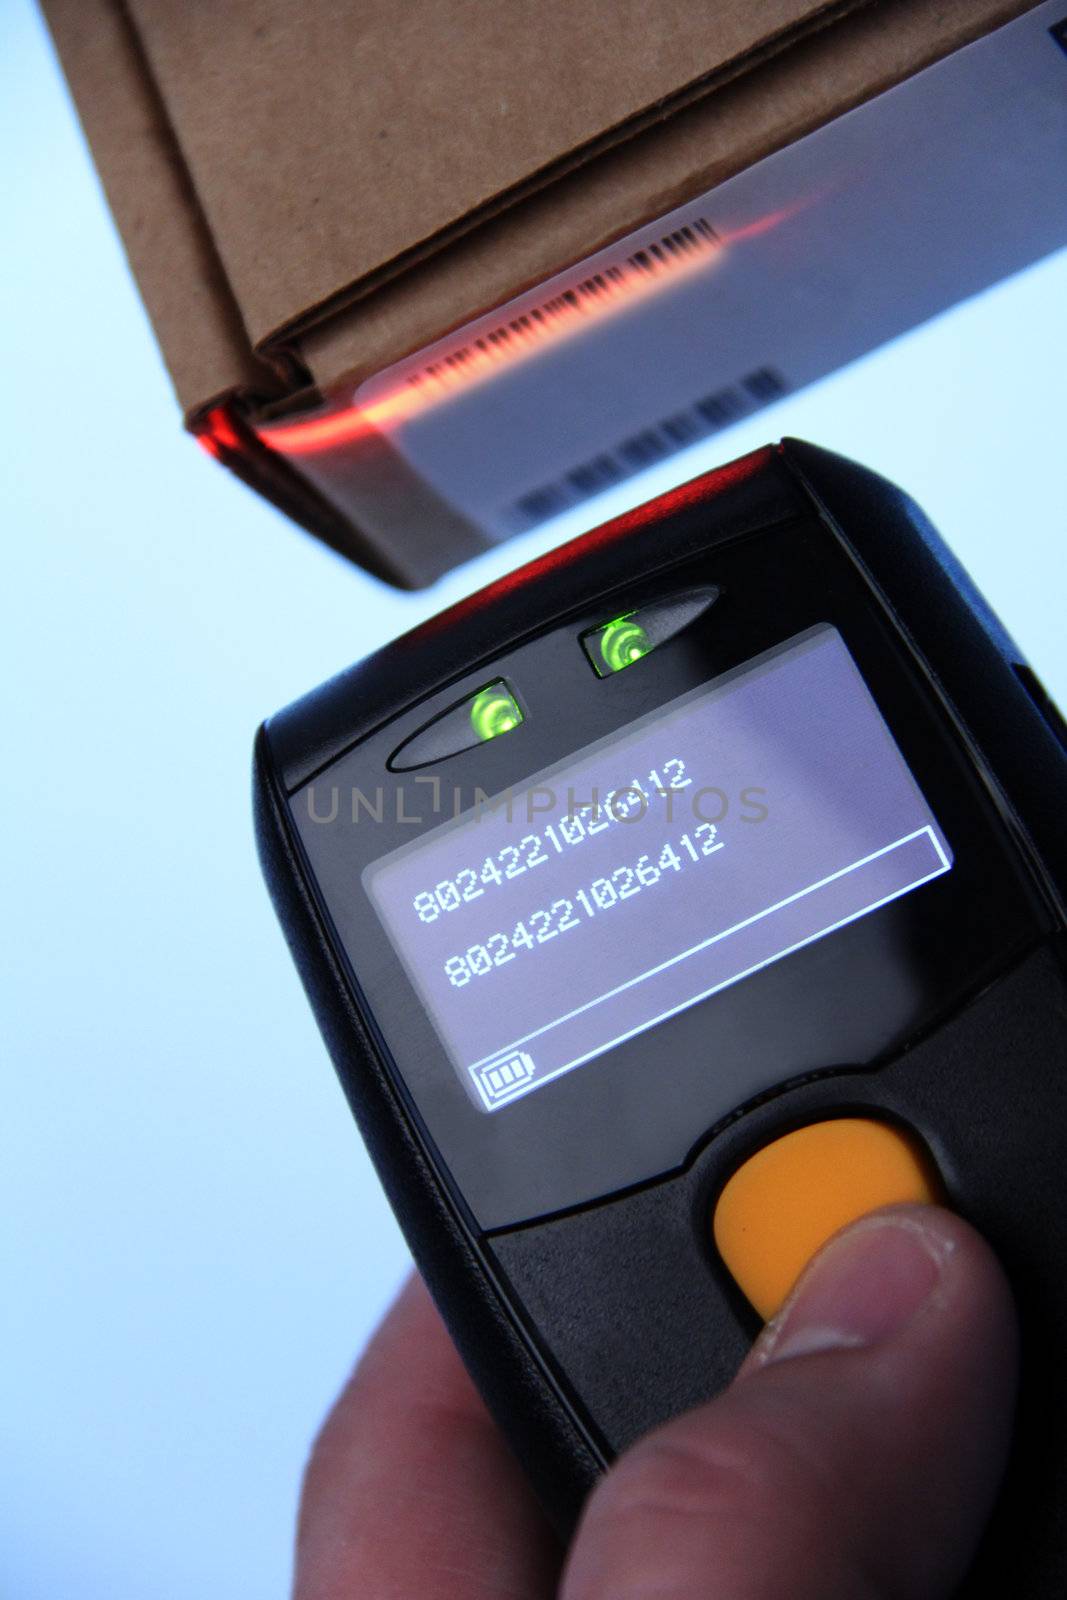 barcode scanner by Hasenonkel